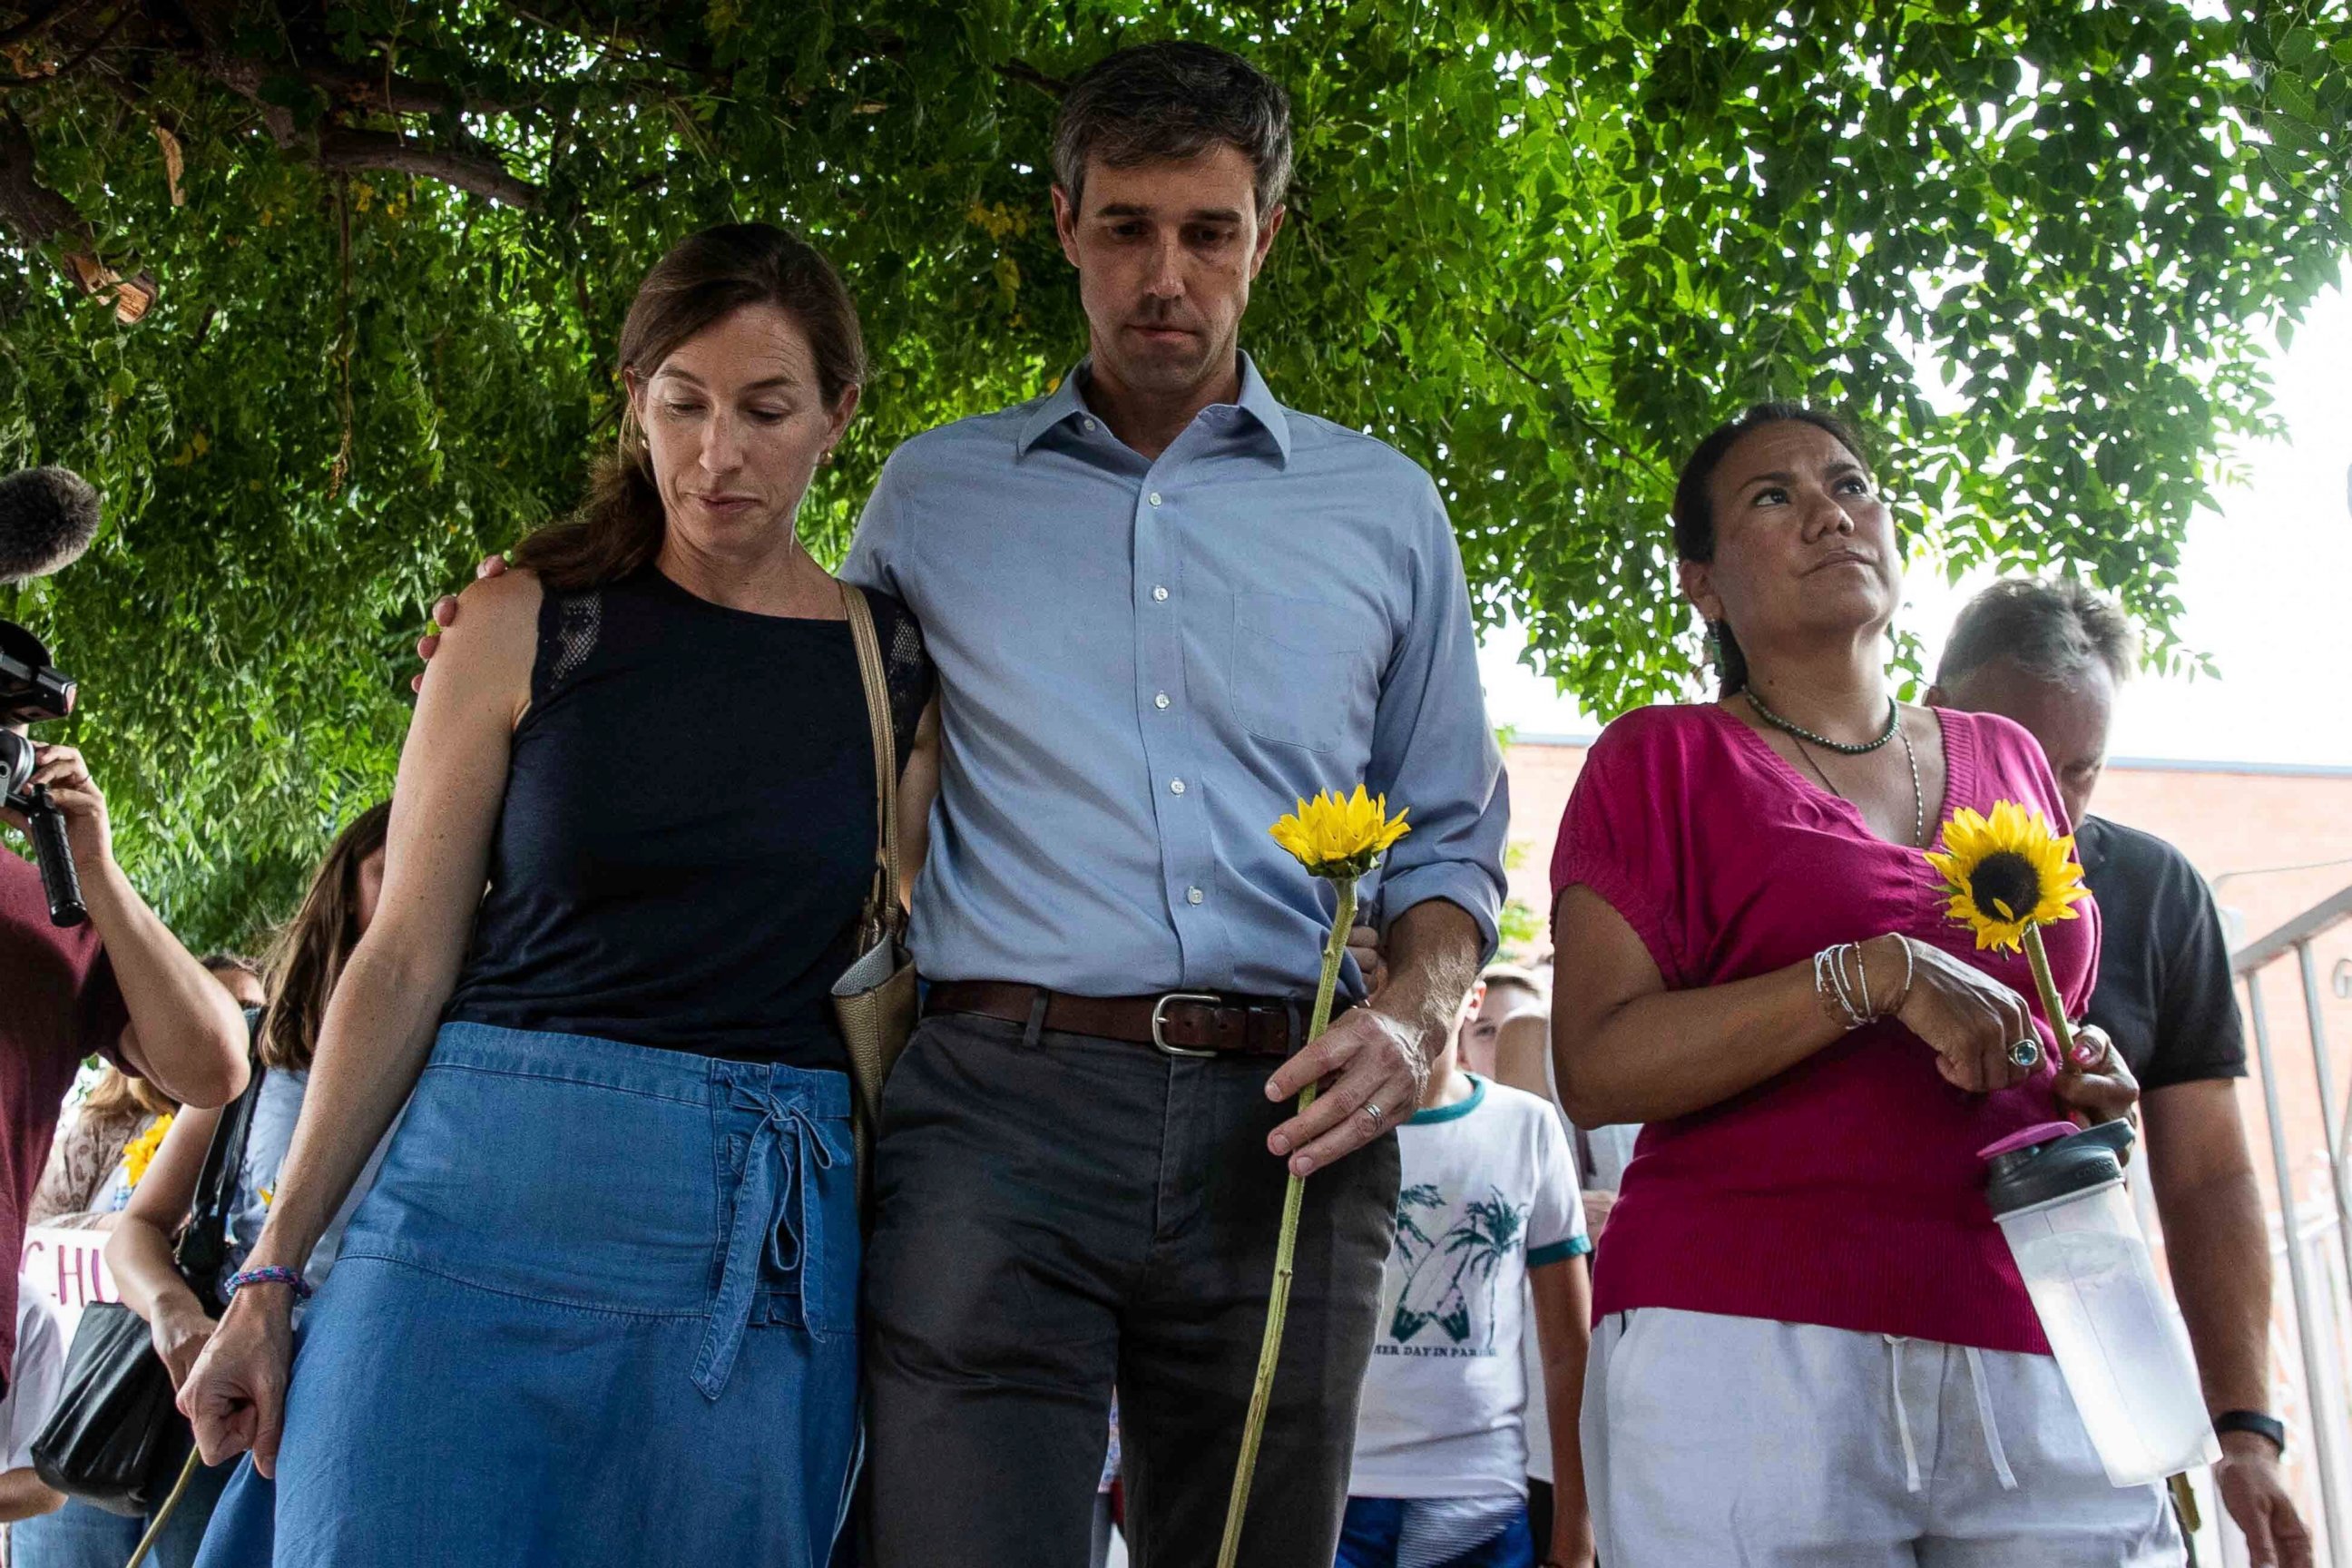 PHOTO: Democratic presidential candidate Beto O'Rourke walks next to his wife Amy Hoover Sanders and Rep. Veronica Escobar Sunday, Aug. 4, 2019.